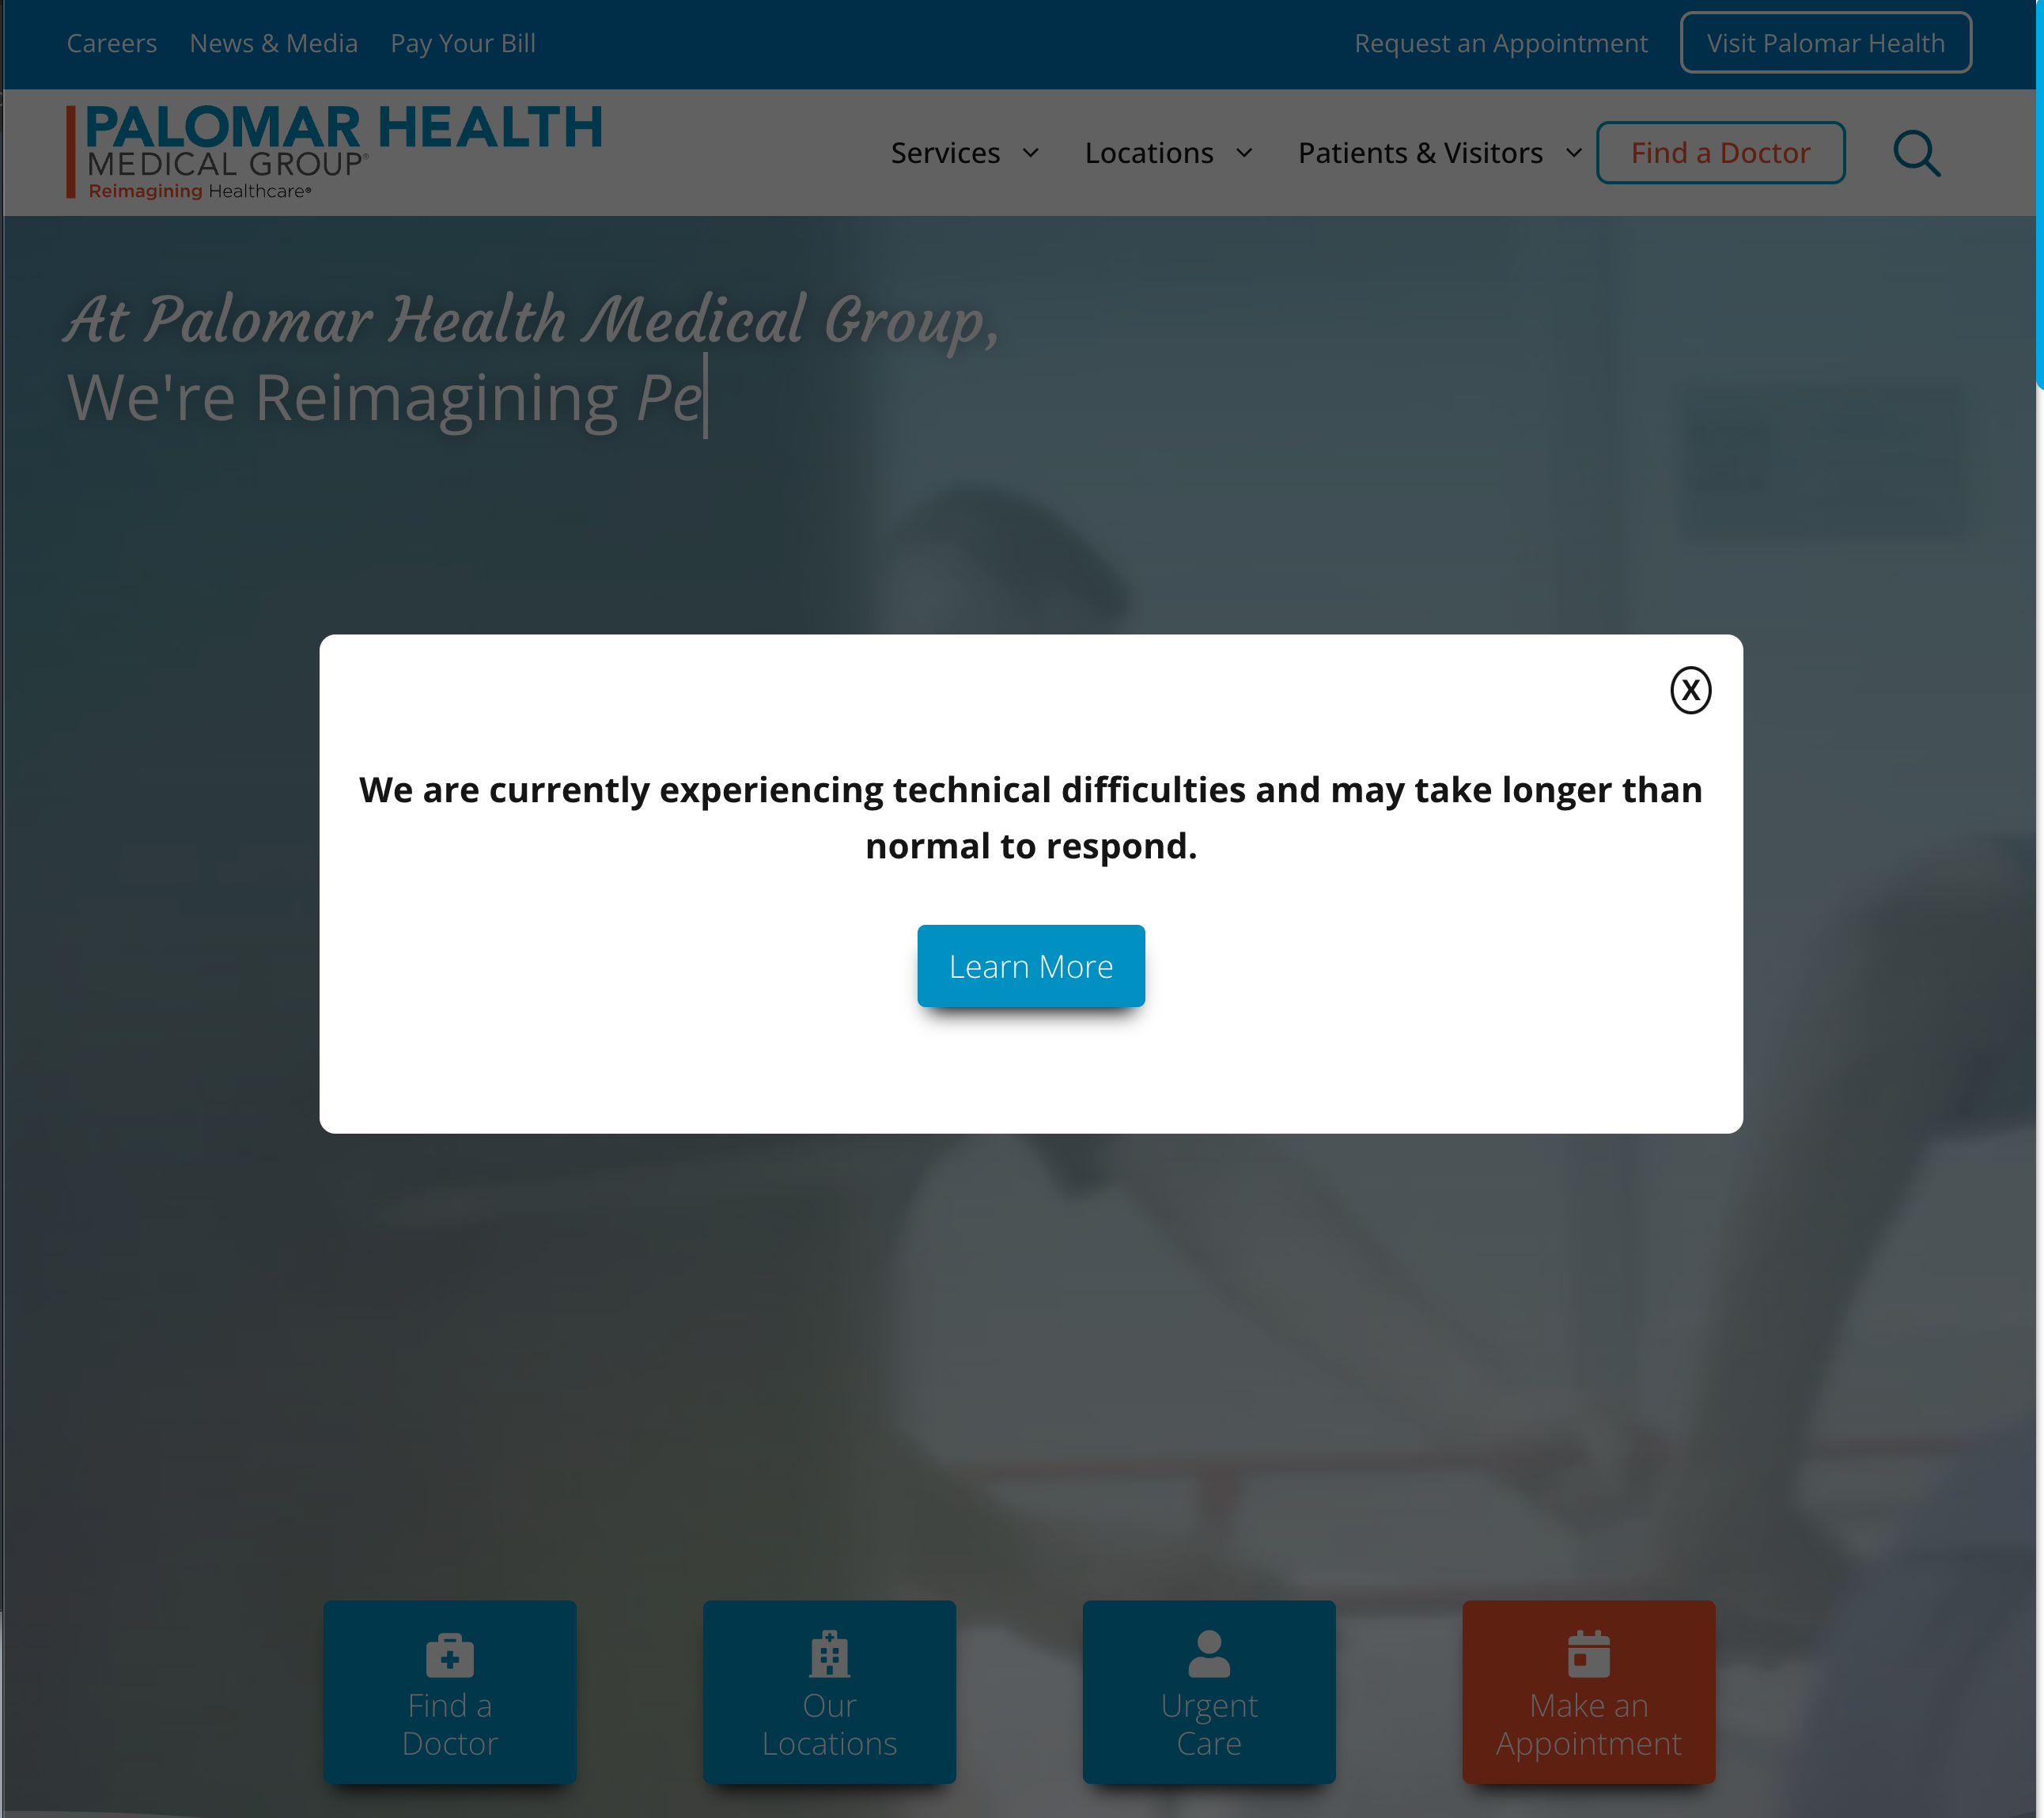 Palomar Health Medical Group hit by potential cyber attack